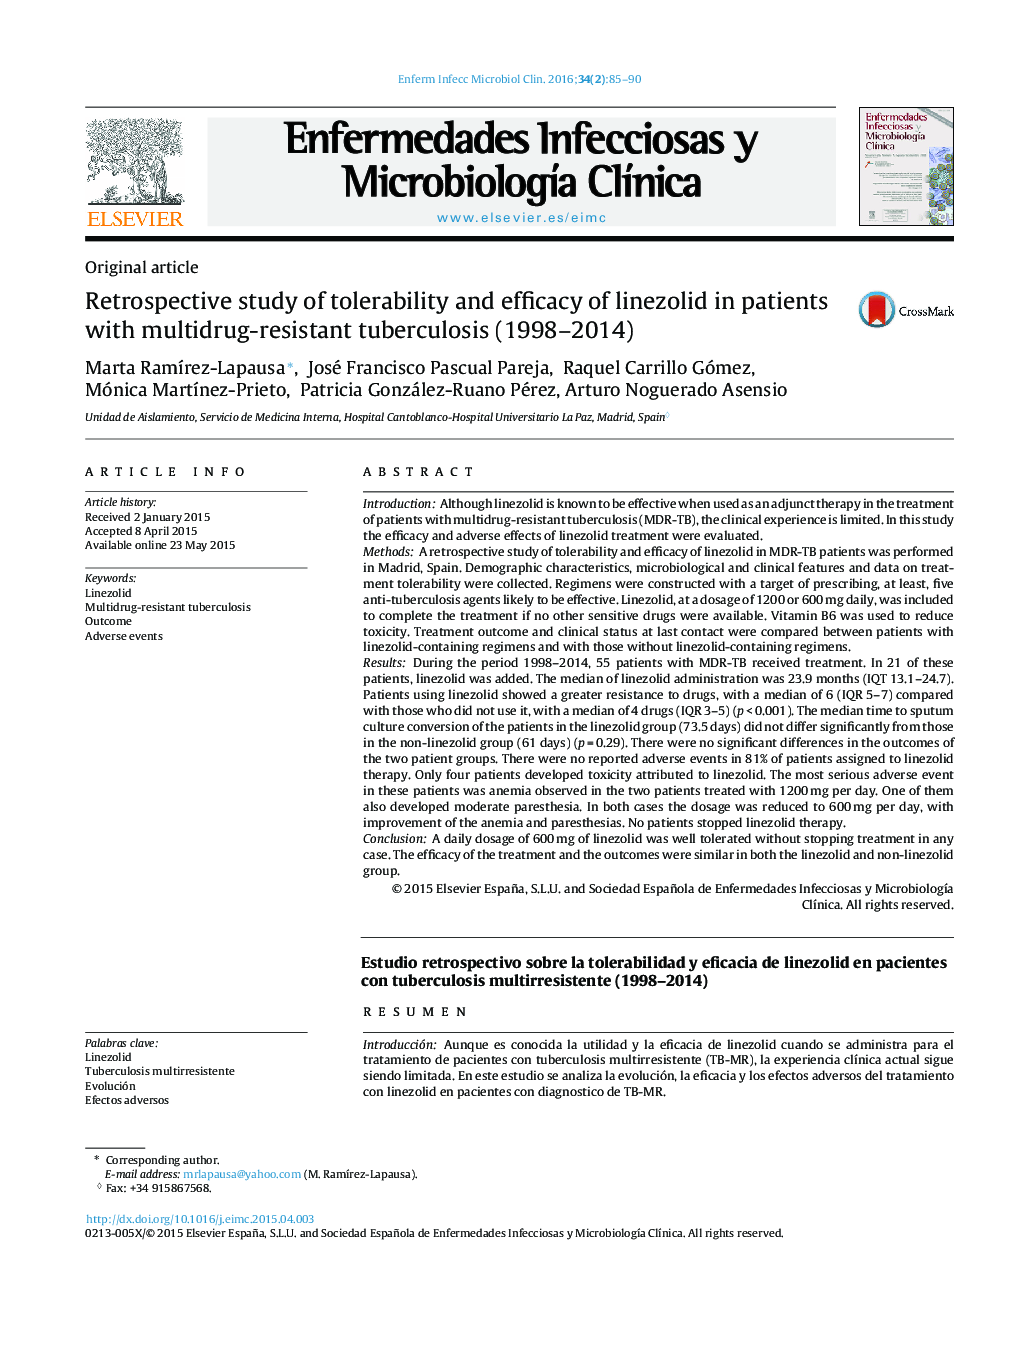 Retrospective study of tolerability and efficacy of linezolid in patients with multidrug-resistant tuberculosis (1998–2014)